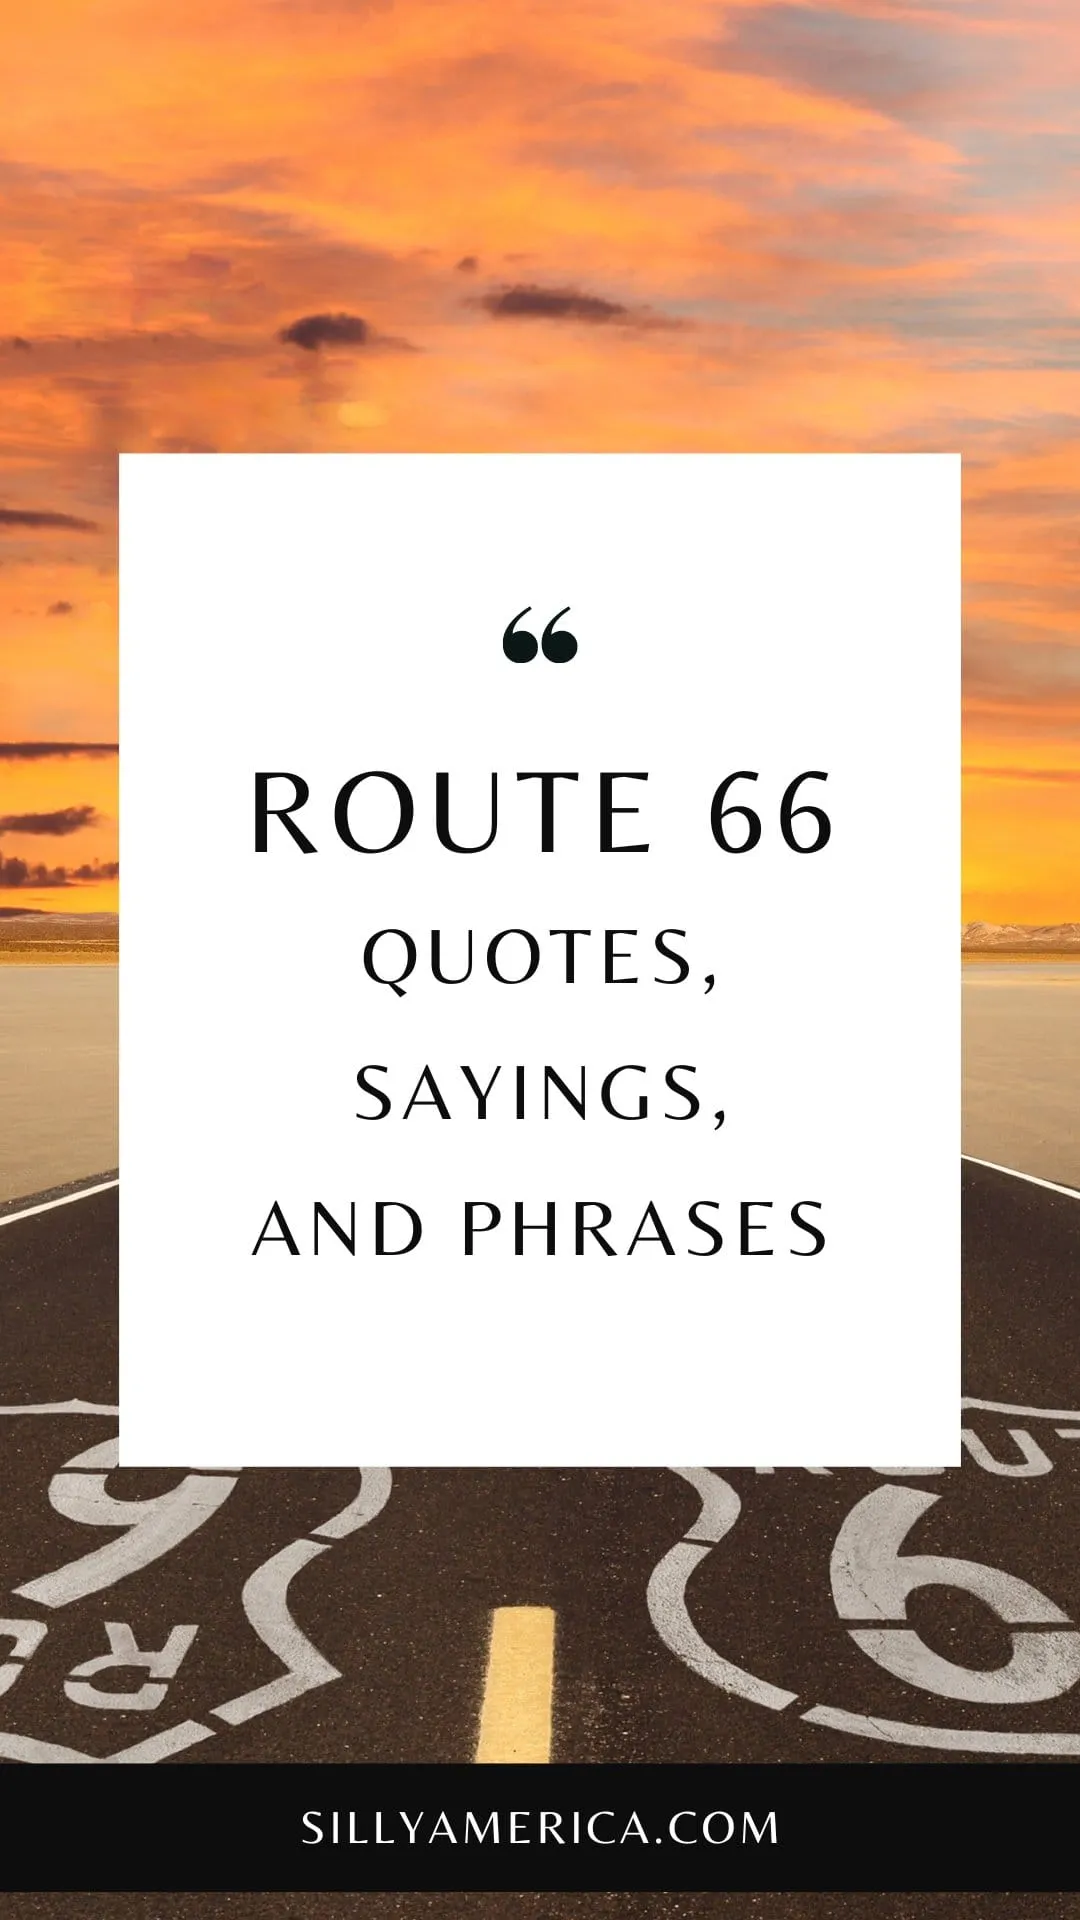 Route 66, the Mother Road, has inspired travelers for decades. This iconic road has taken its place in history as a pilgrimage that took people from east to west. The road has had a large influence on popular culture. books, movies, music, and the people who have traveled its path. It's no wonder Route 66 quotes, sayings, and phrases inspired by the Mother Road abound. Use these Route 66 quotes to inspire your next road trip or in TikTok or Instagram captions to express the journey. #Route66